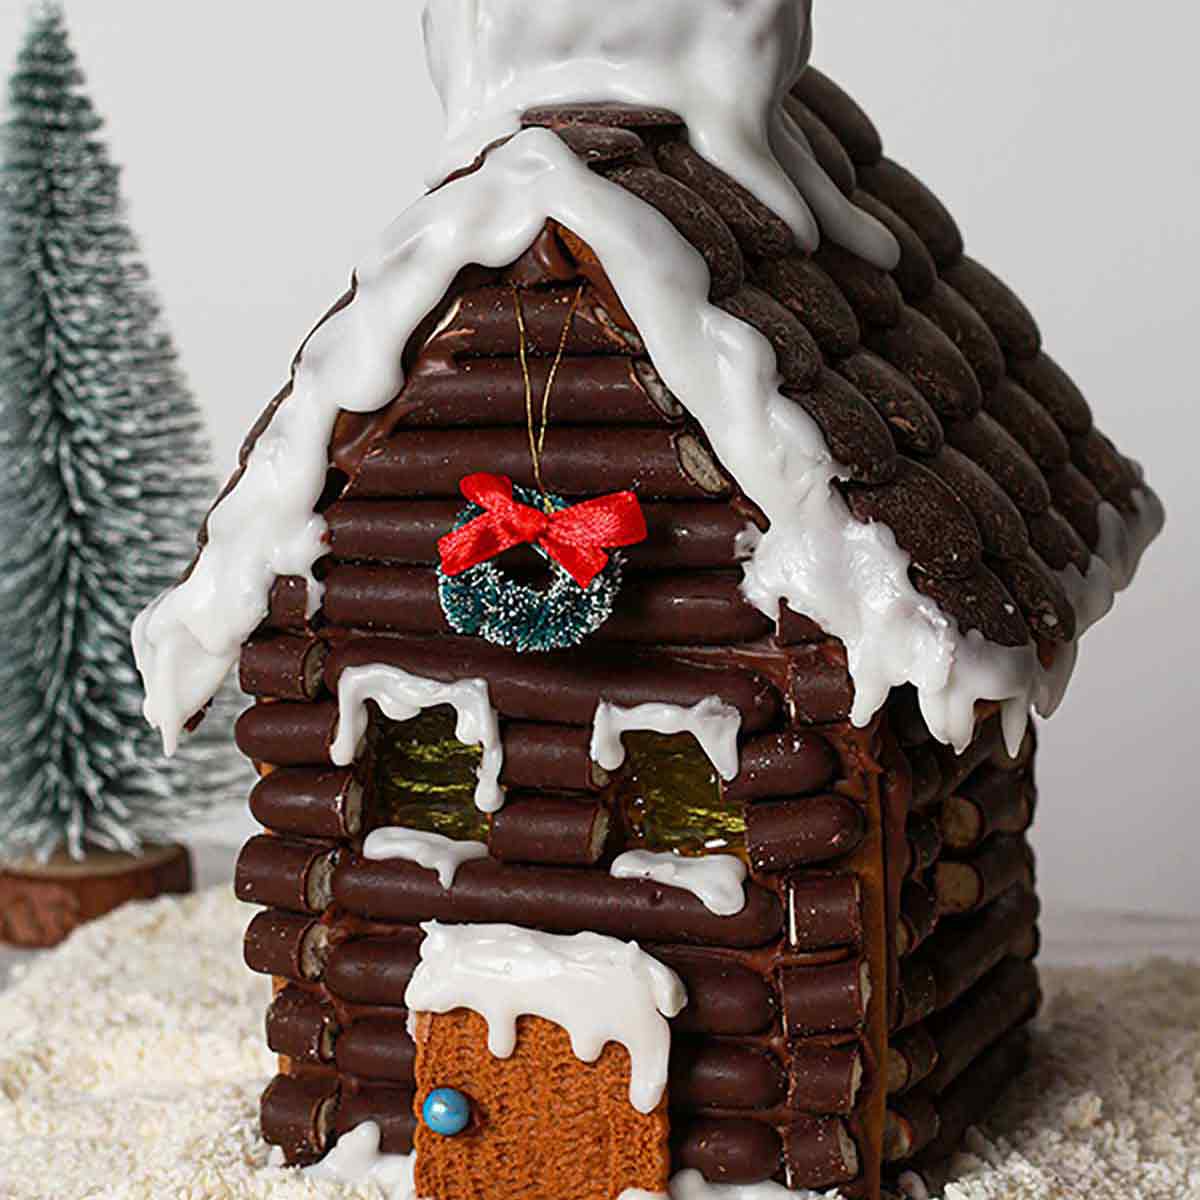 Chocolate Vegan Gingerbread House With A Snowy Background.